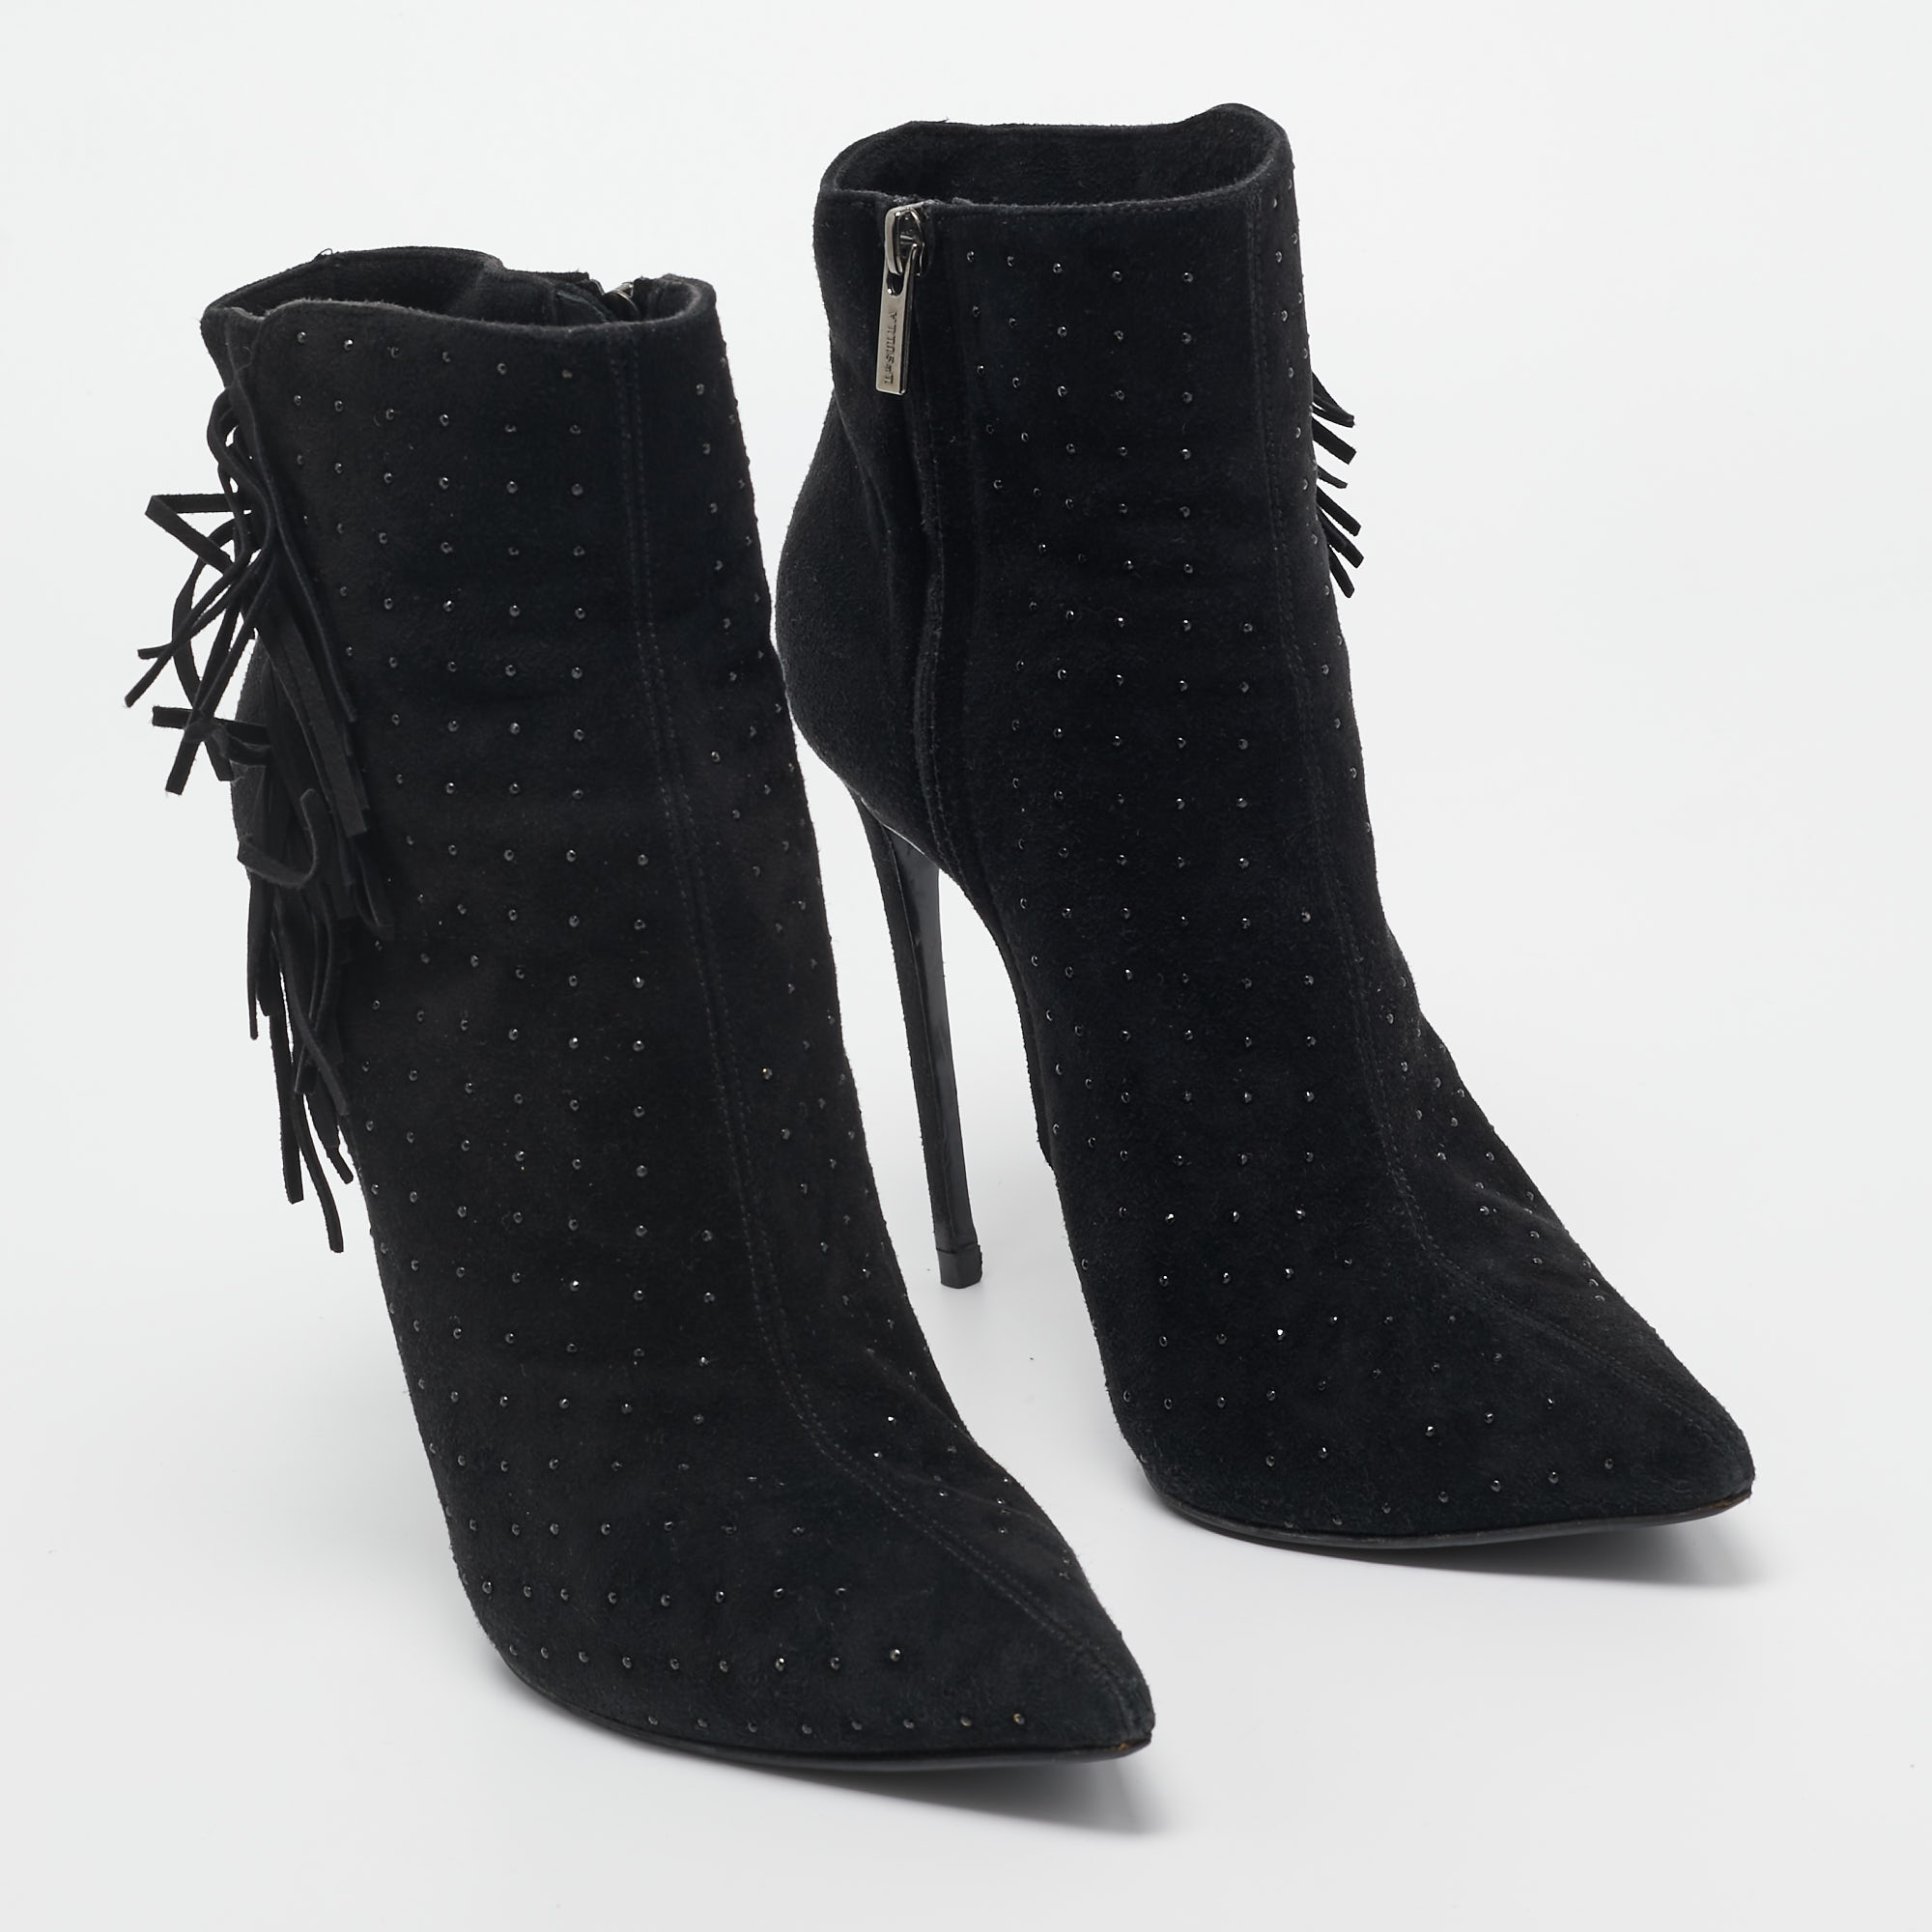 Le Silla Black Suede Studded Lace-Up Ankle Boots Size 38